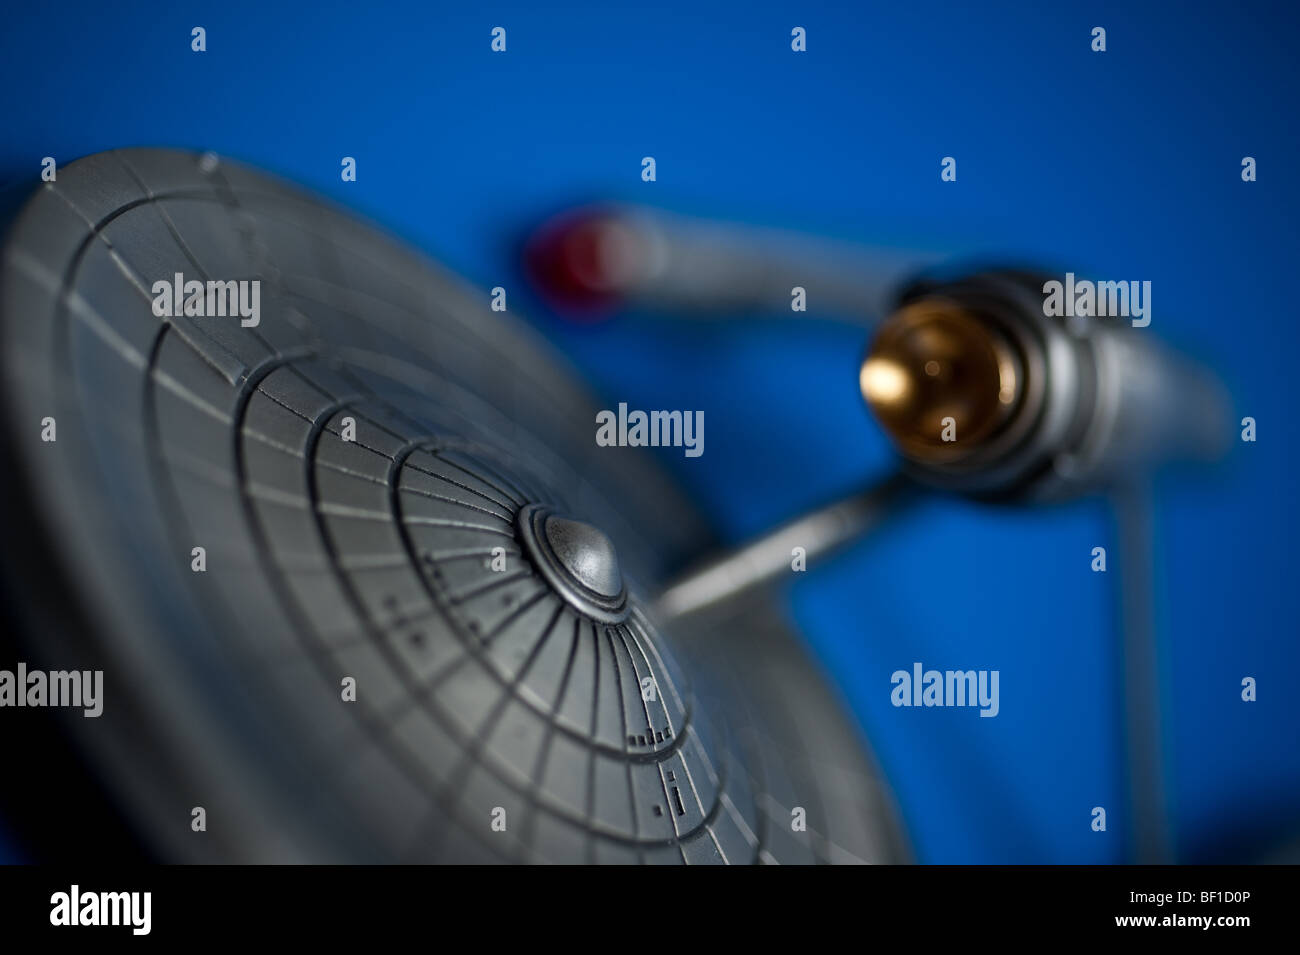 A pewter model of the famous Starship, USS Enterprise, from TV's Star Trek, displayed on a blue background. Stock Photo